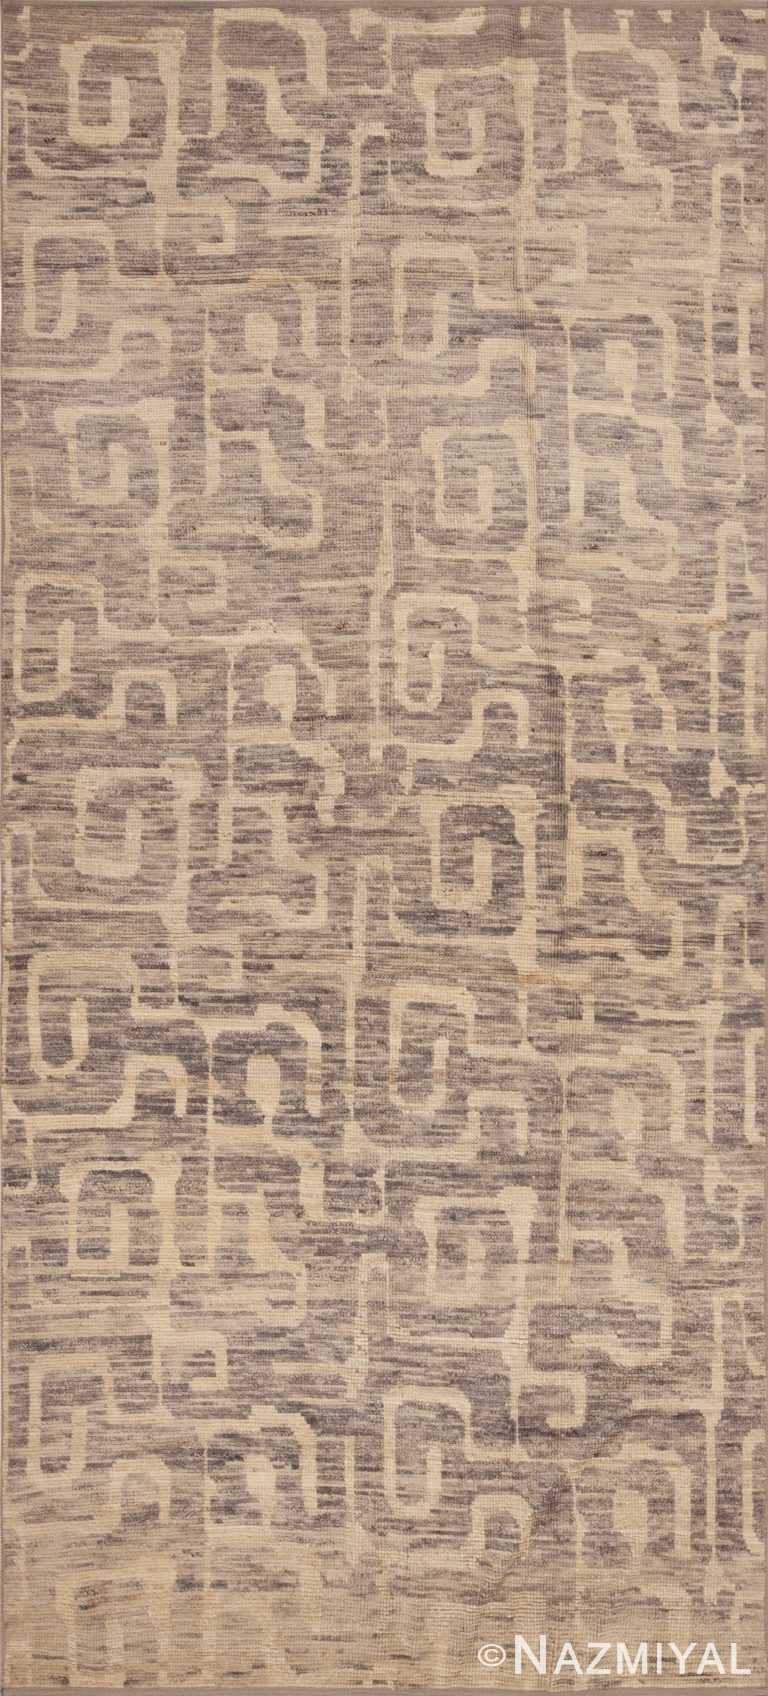 Artistic Modern Gallery Size Soft Neutral Color Tribal Design Area Rug 11002 by Nazmiyal Antique Rugs